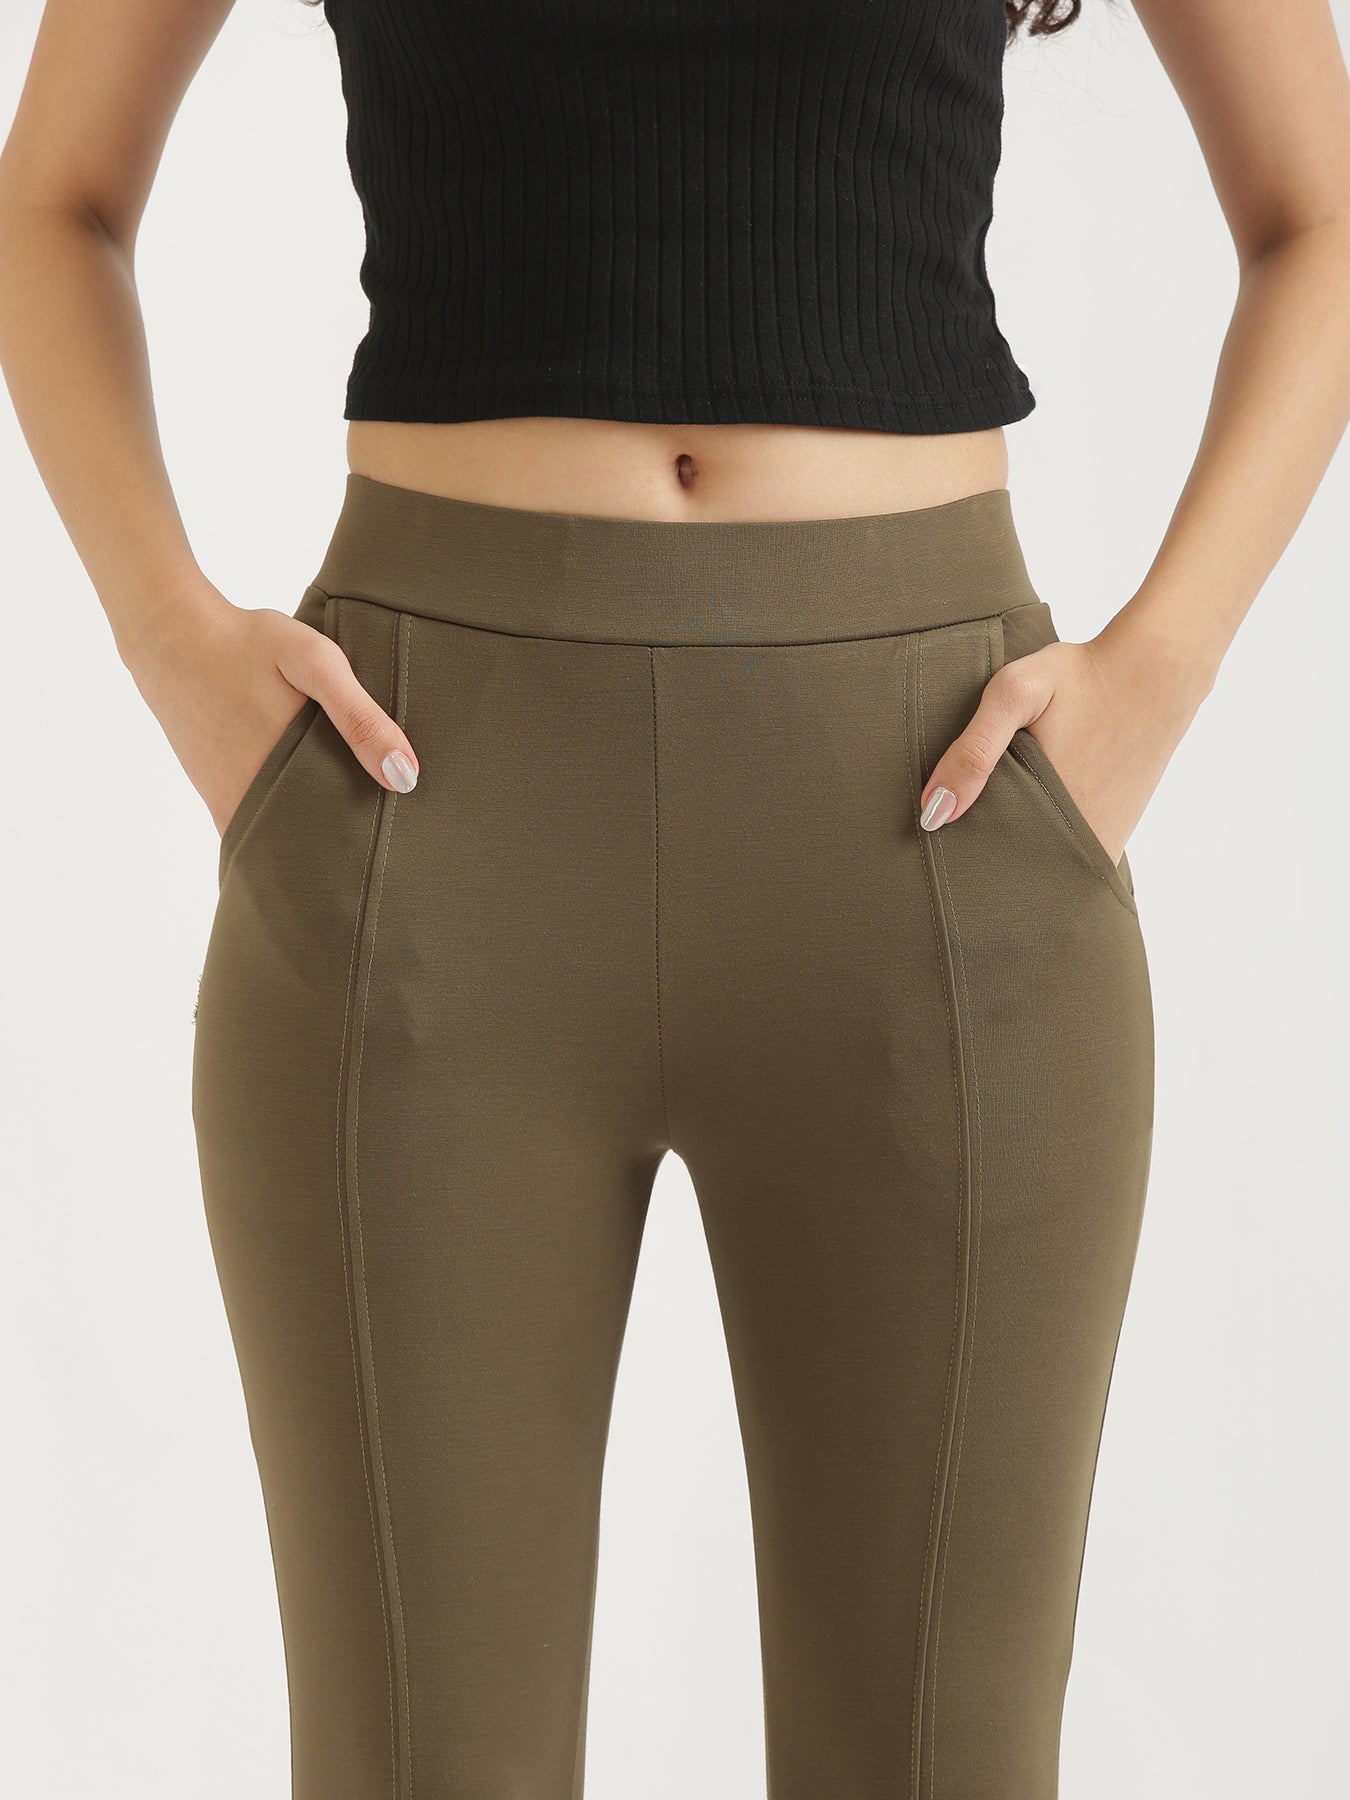 Cement Grey 4-Way Stretchable Pants